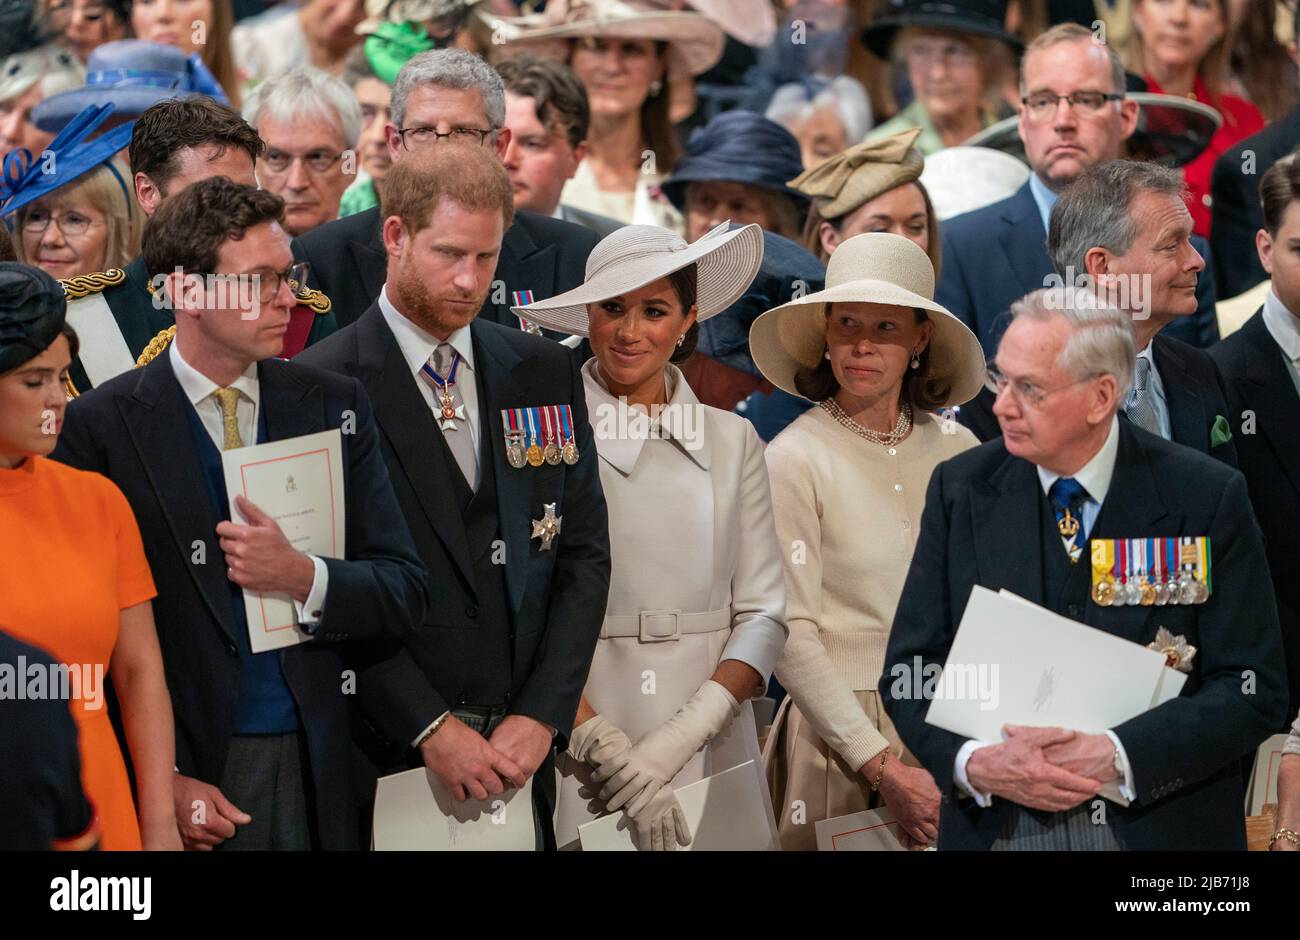 (left to right) Princess Eugenie, Jack Brooksbank, The Duke and Duchess of Sussex, Lady Sarah Chatto and Daniel Chatto attend the National Service of Thanksgiving at St Paul's Cathedral, London, on day two of the Platinum Jubilee celebrations for Queen Elizabeth II. Picture date: Friday June 3, 2022. Stock Photo